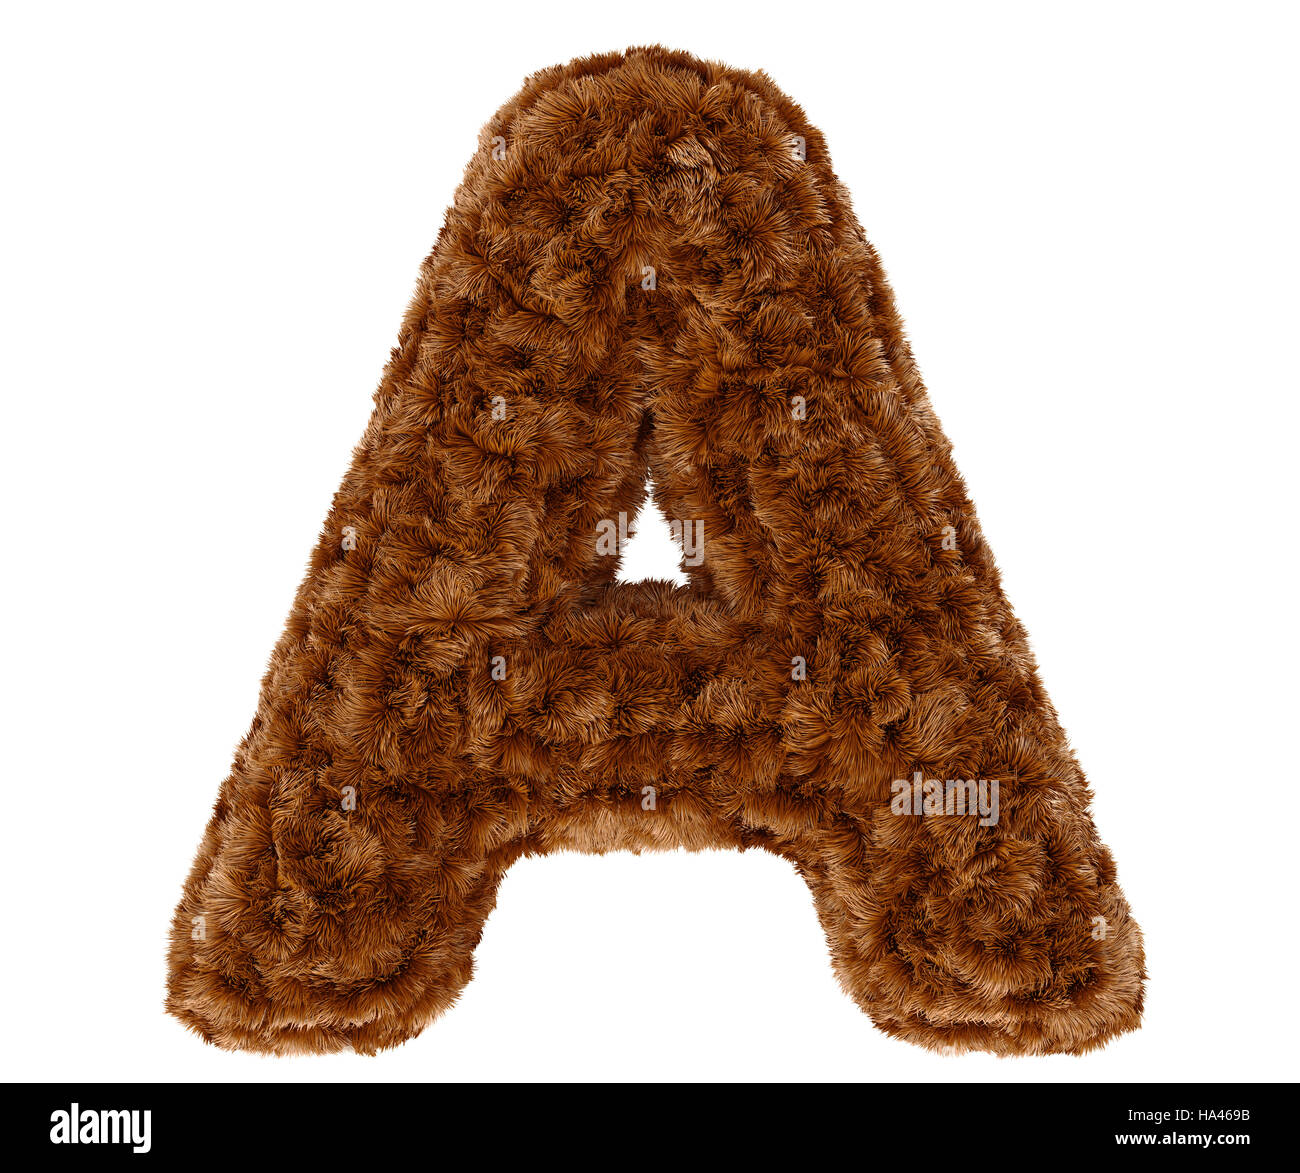 Wild animal brown bushy bear decorative fur alphabet capital letter A. 3d rendering illustration. Isolated on white background Stock Photo